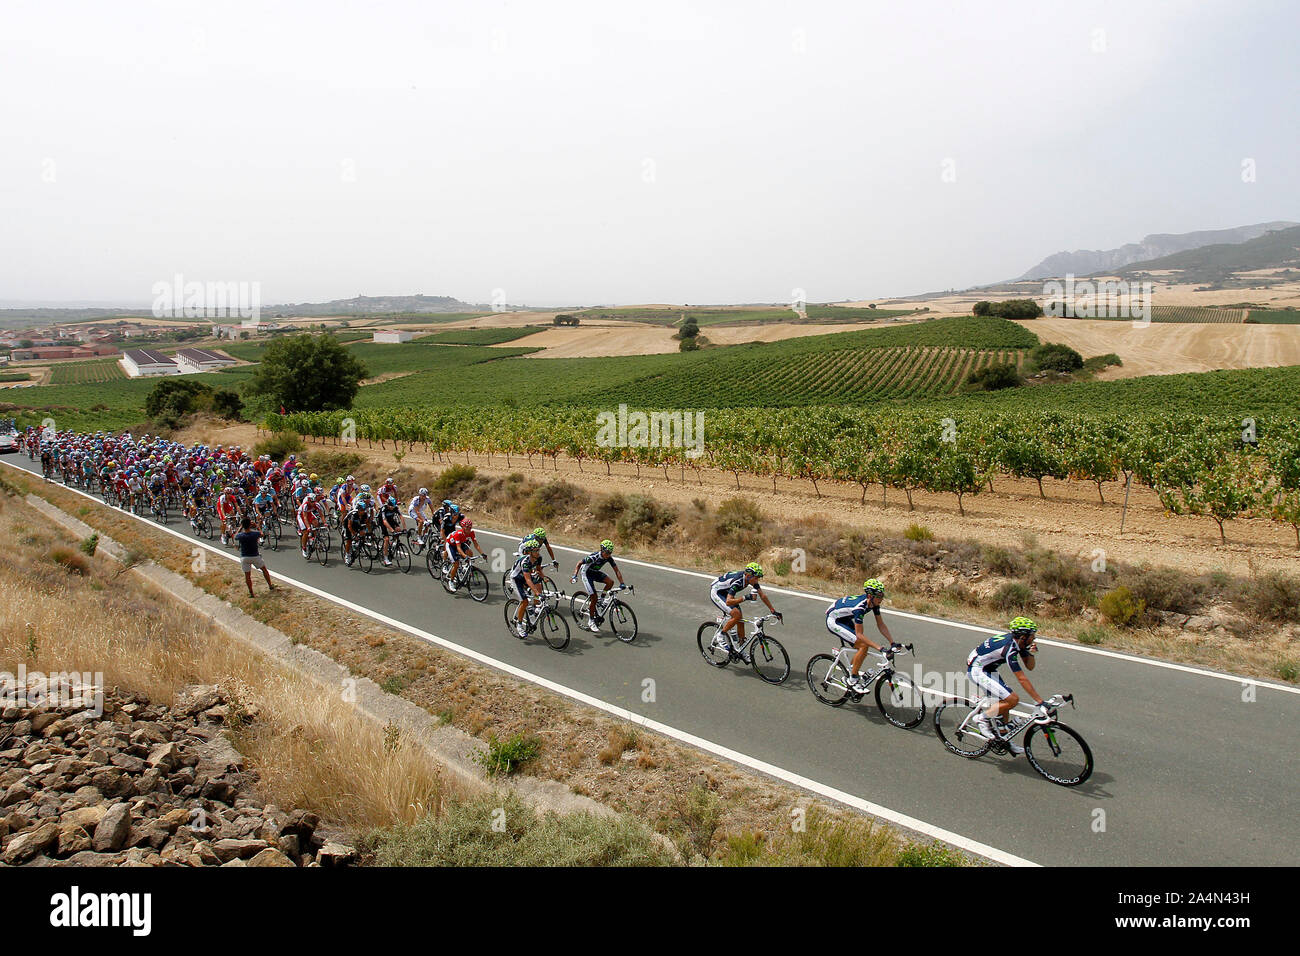 Movistar Team leads the group during the stage of La Vuelta 2012 between Faustino V and Eibar (Arrate).August 20,2012. (ALTERPHOTOS/Paola Otero) /Nort Stock Photo